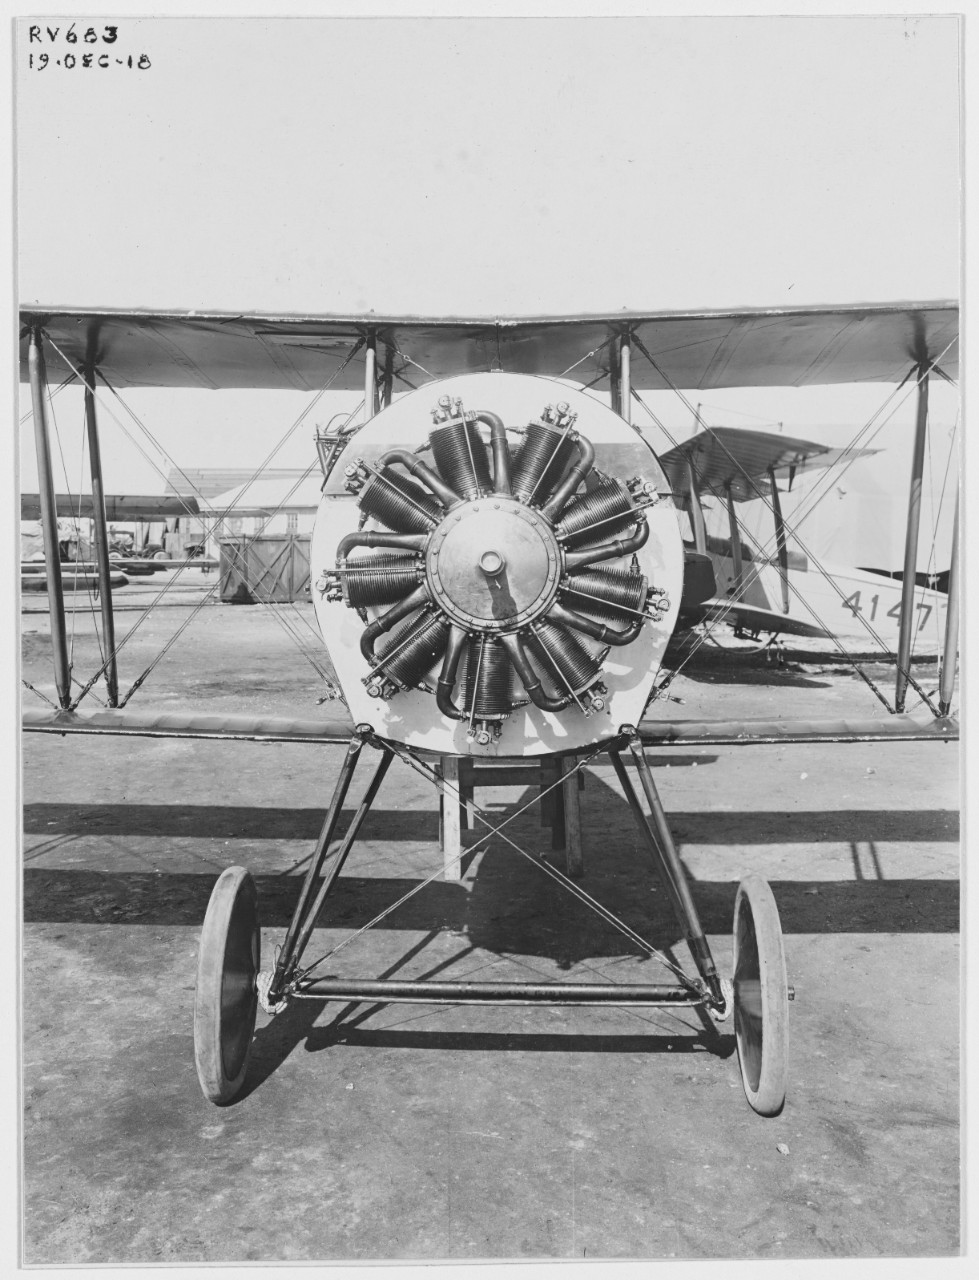 Standard Scout Army Airplane